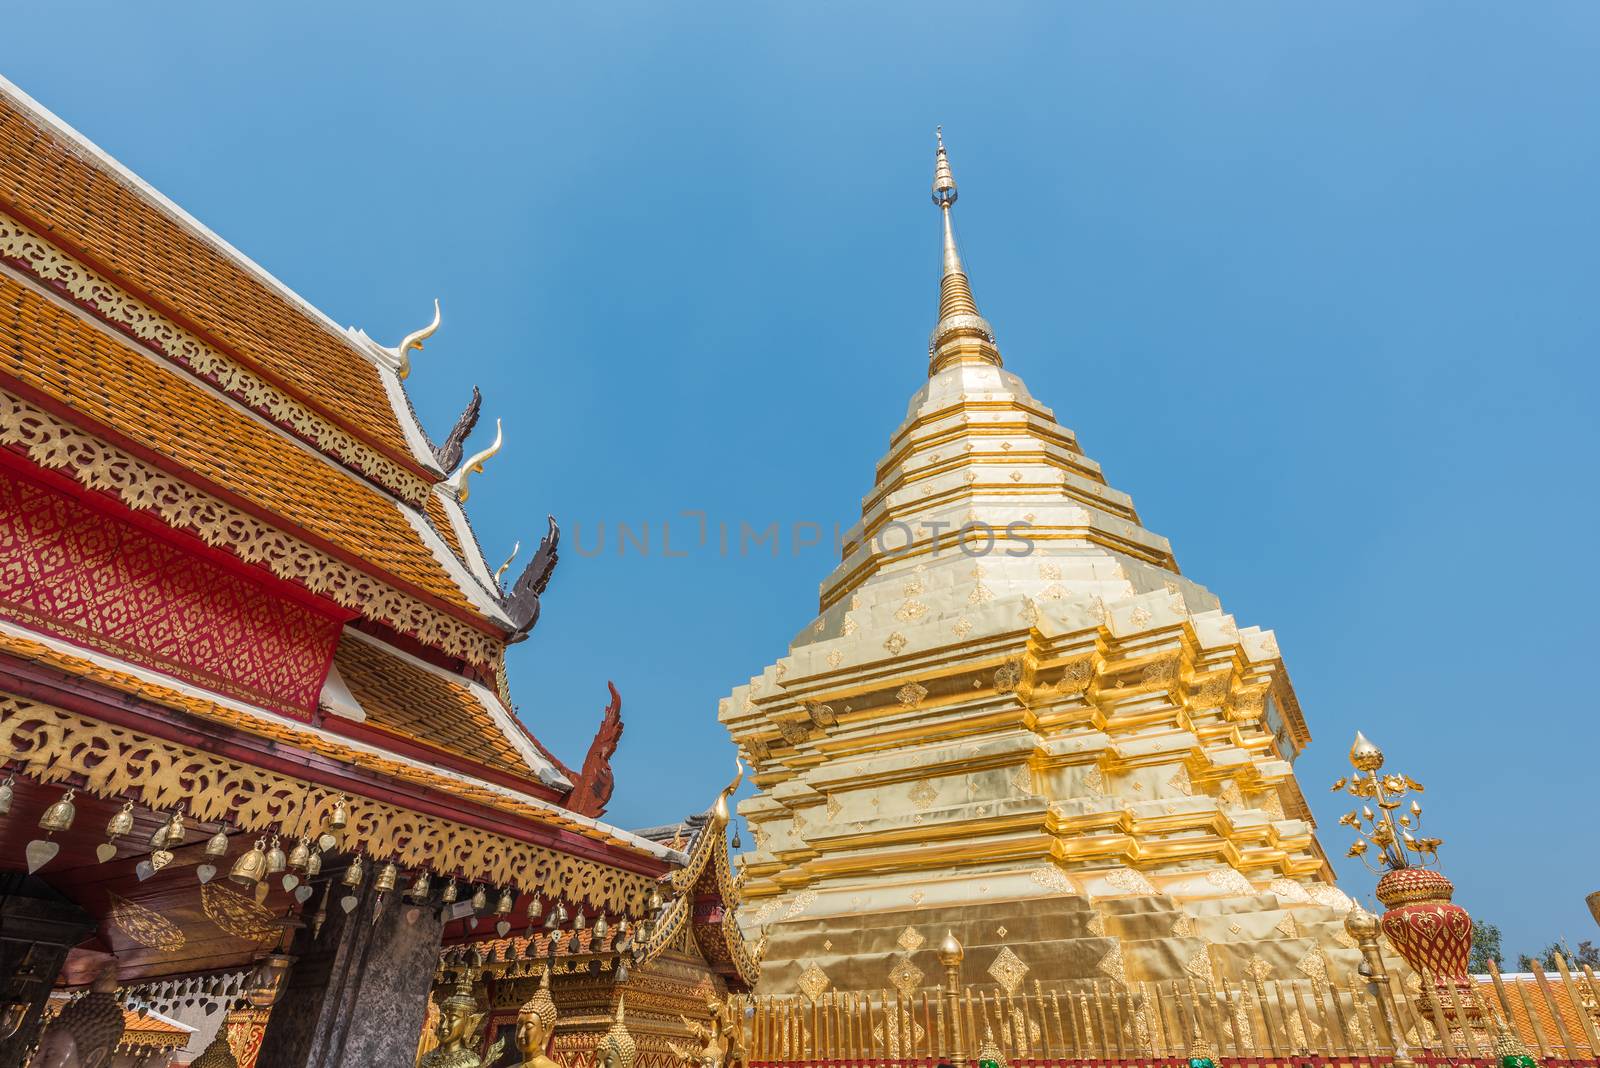 Wat Phrathat Doi Suthep temple in Chiang Mai, Thailand. by t0pkul3